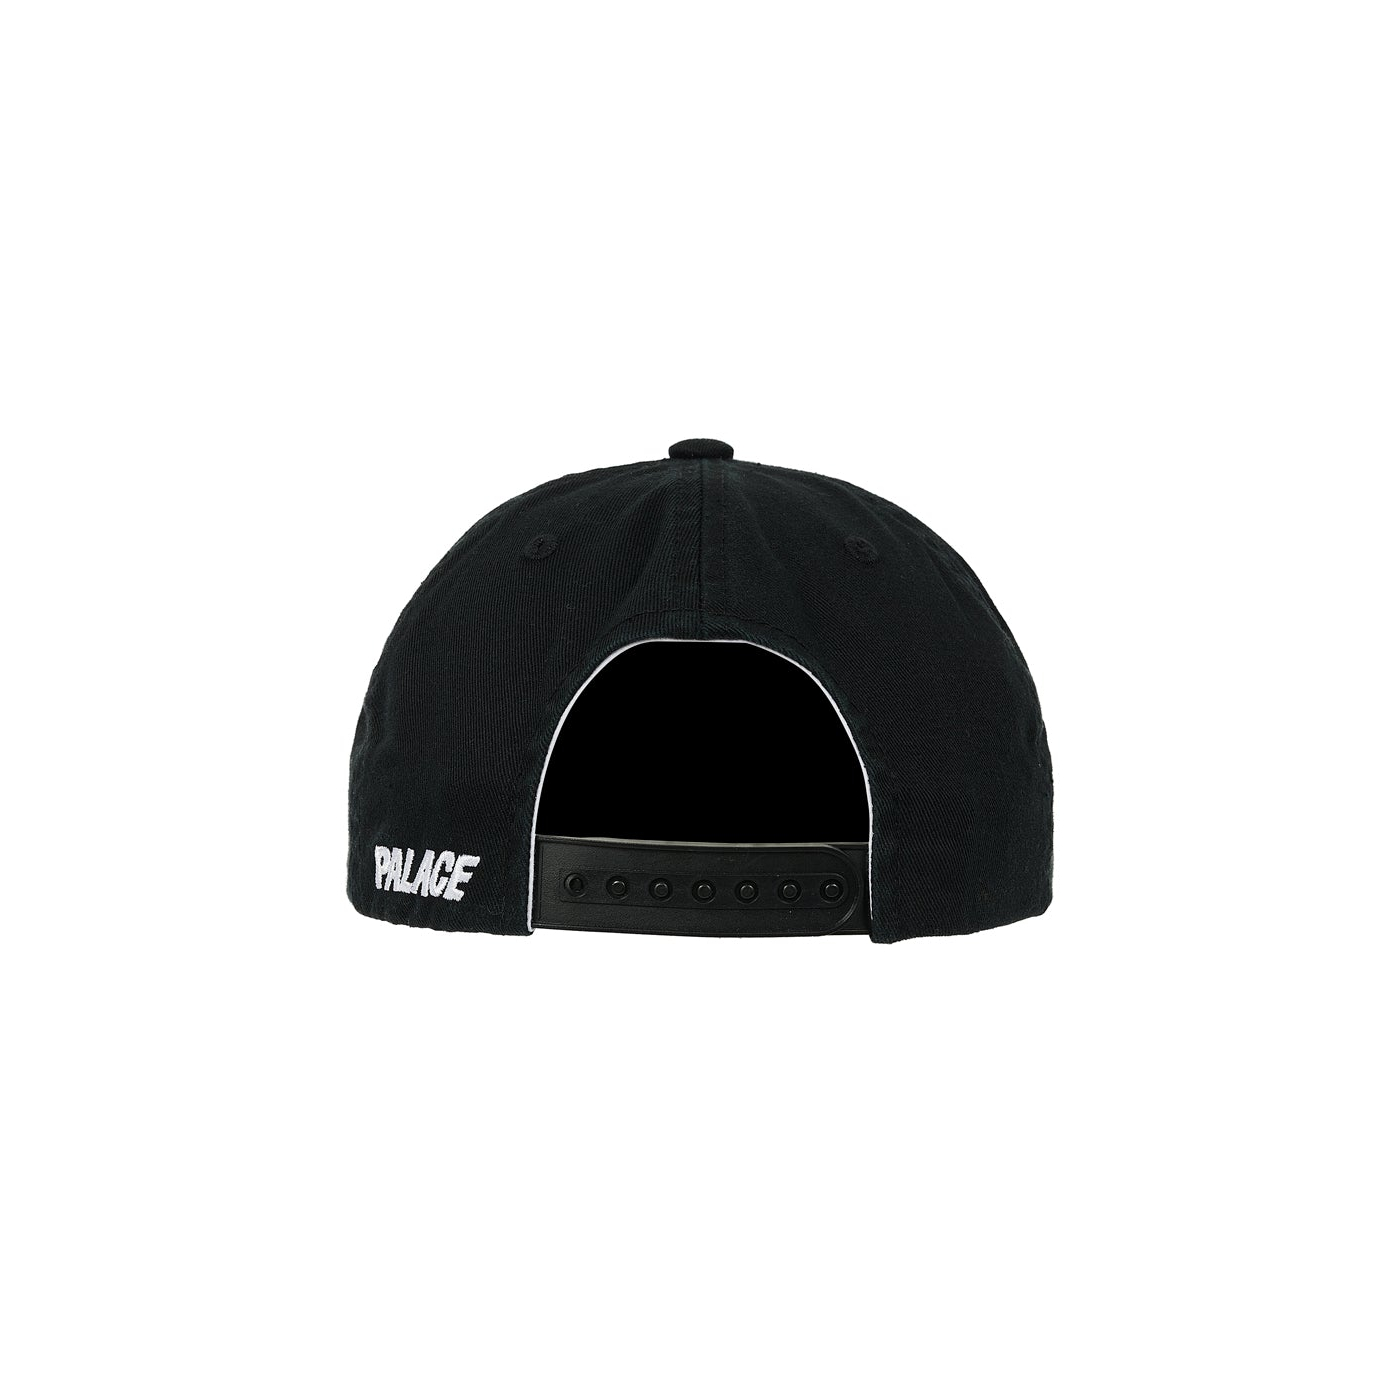 Thumbnail FAUX LEATHER BUNNING MAN SNAPBACK BLACK one color